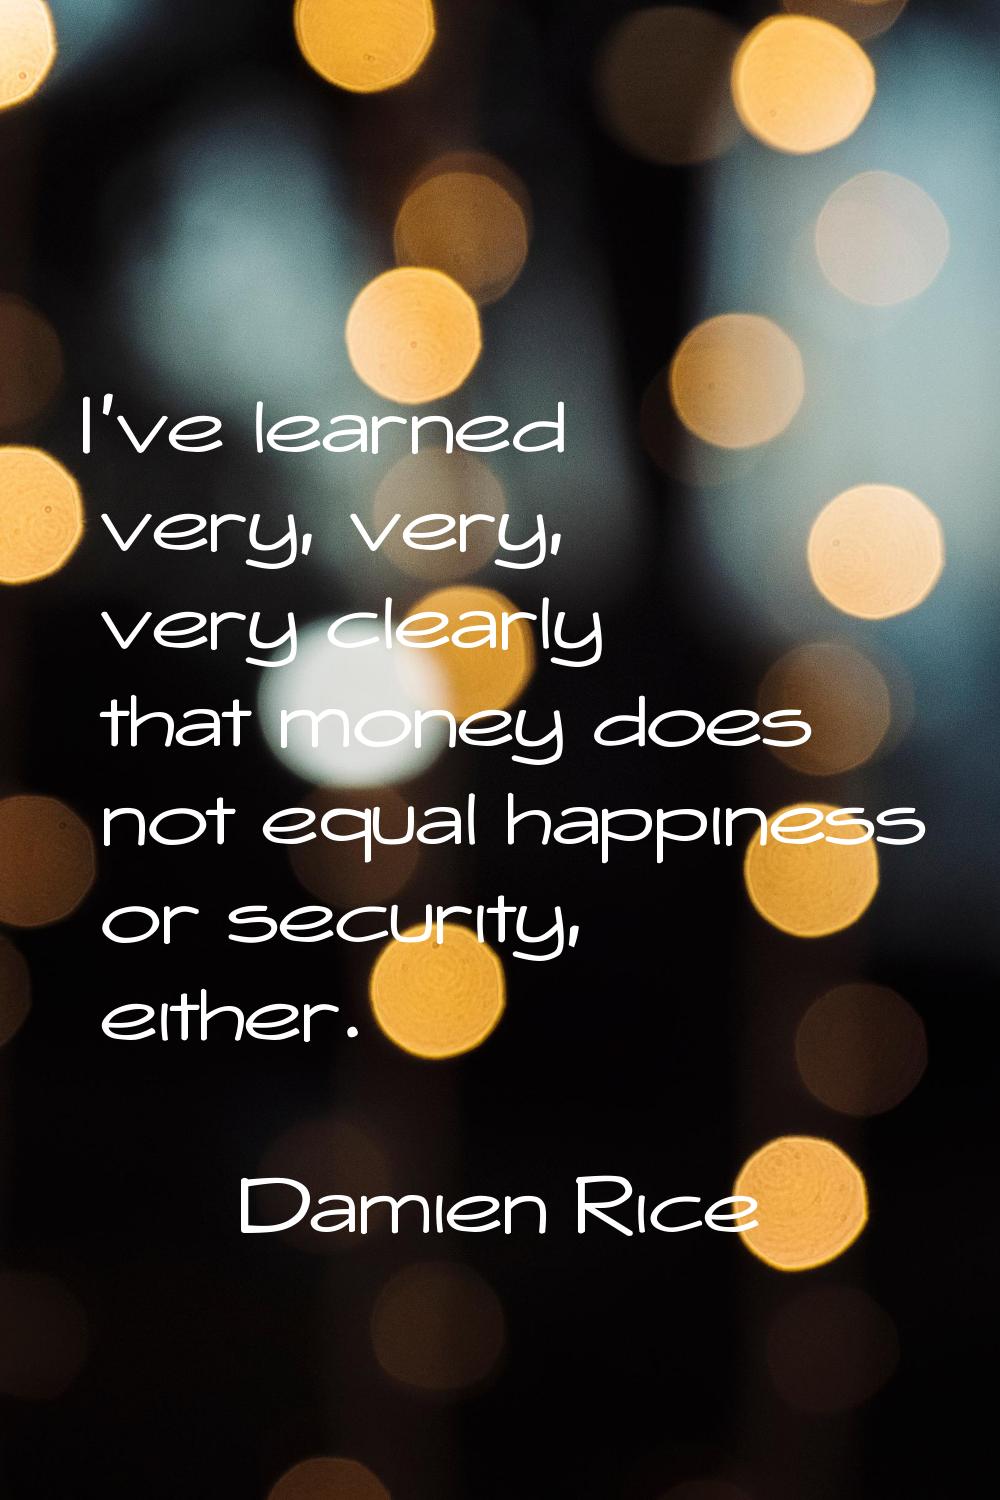 I've learned very, very, very clearly that money does not equal happiness or security, either.